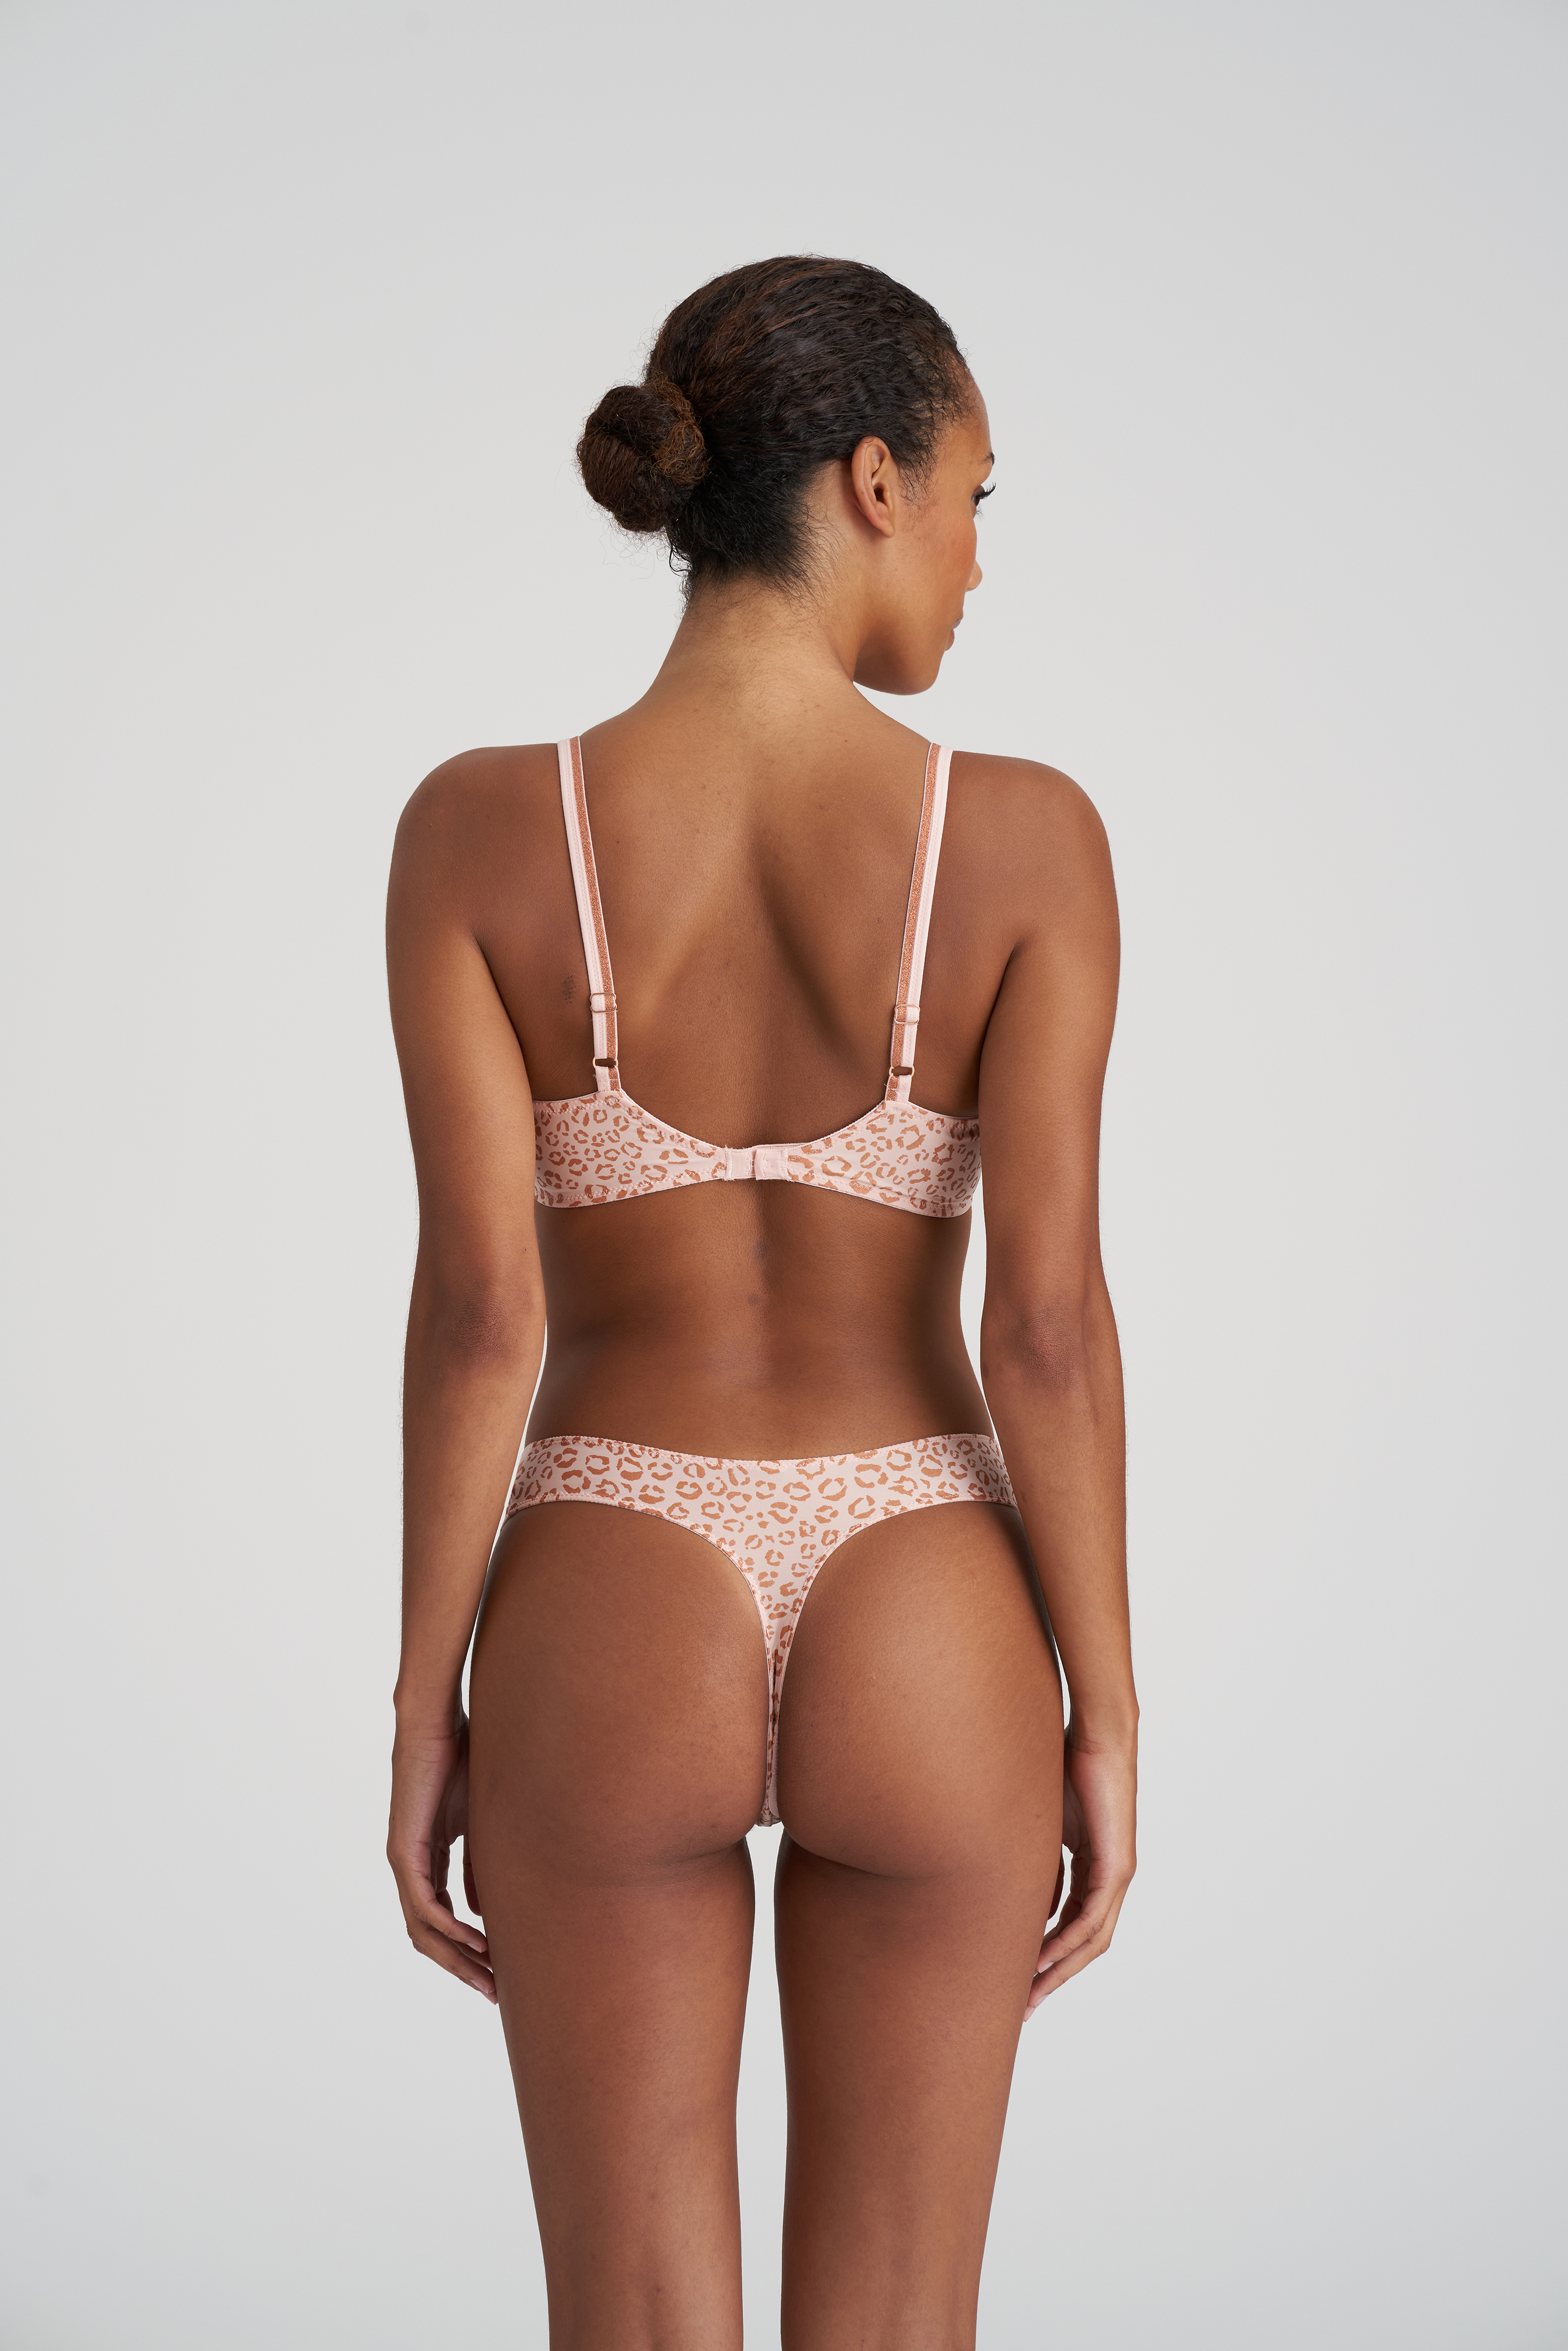 Marie Jo Manyla Pearly Pink Full Cup Bra